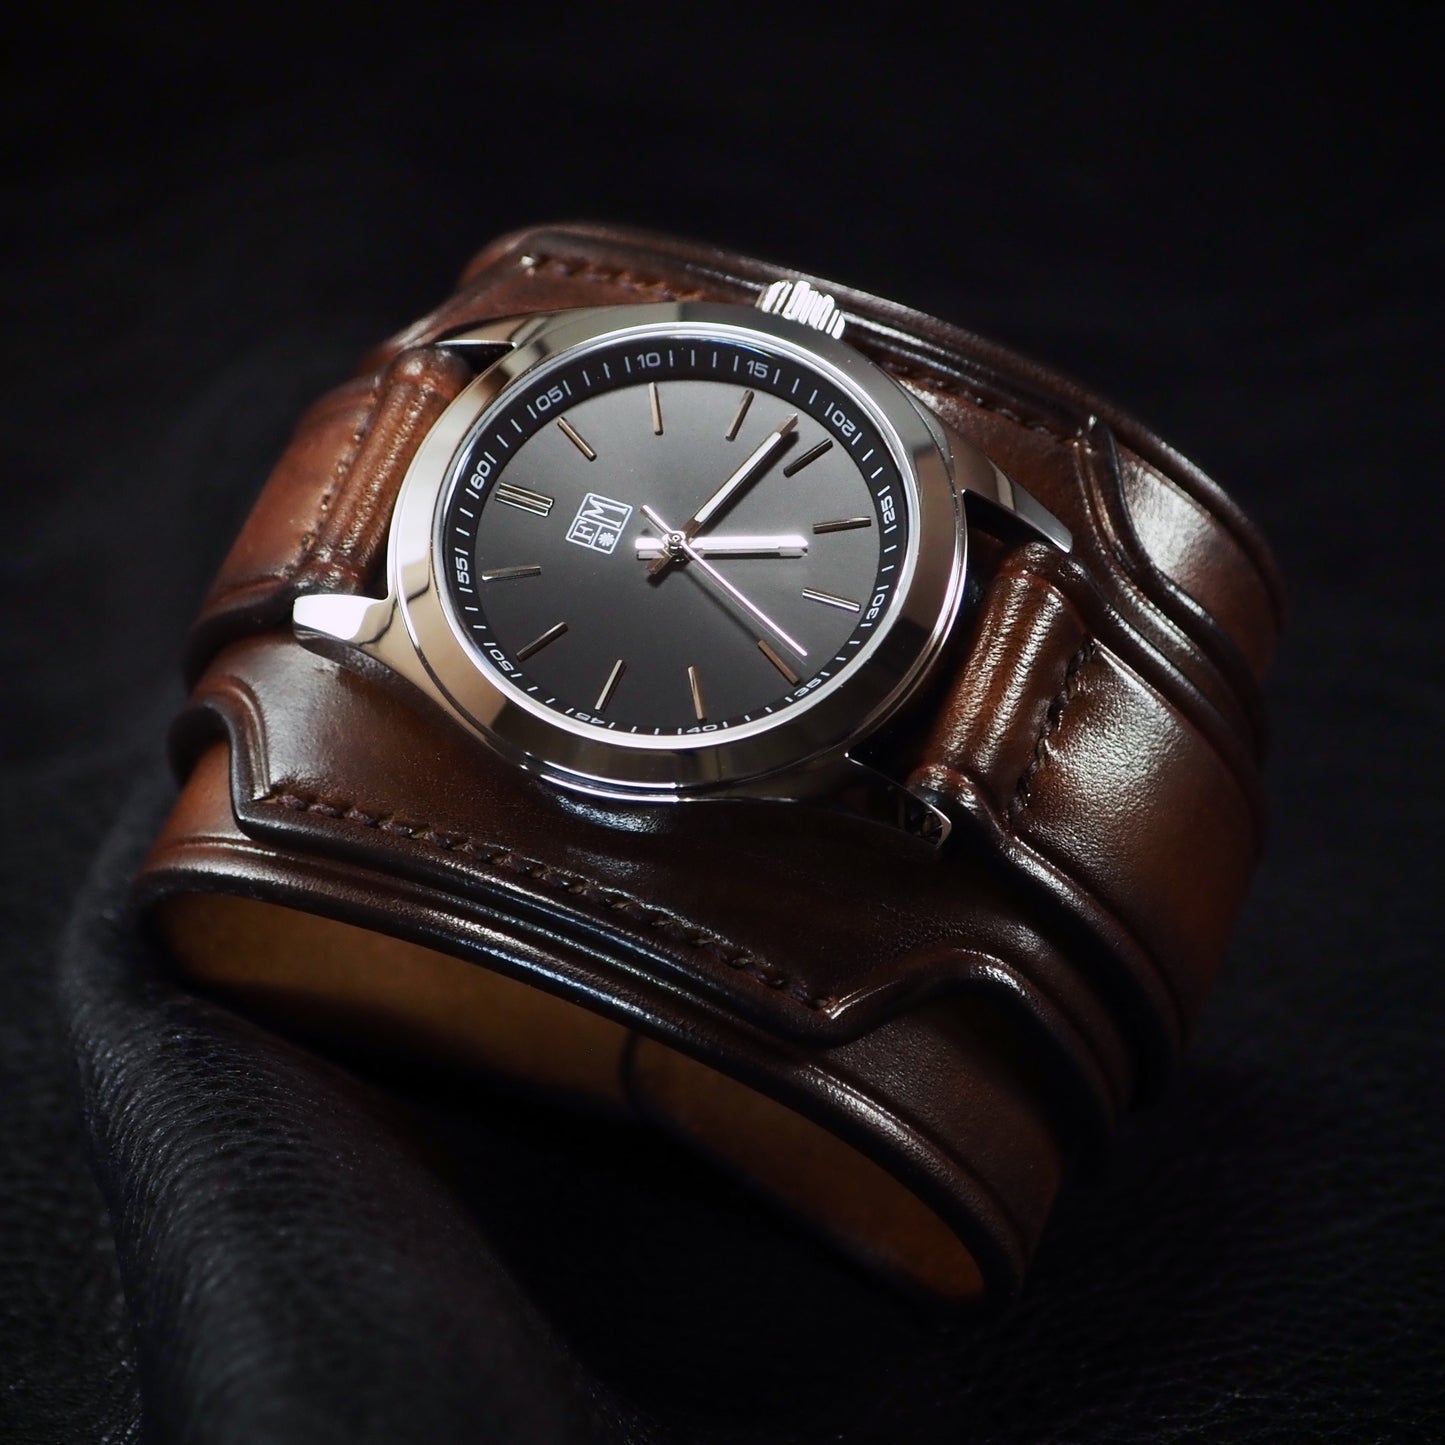 Rich Brown Leather cuff watch : Rich tones layered leather watchband. Hand Made In New York